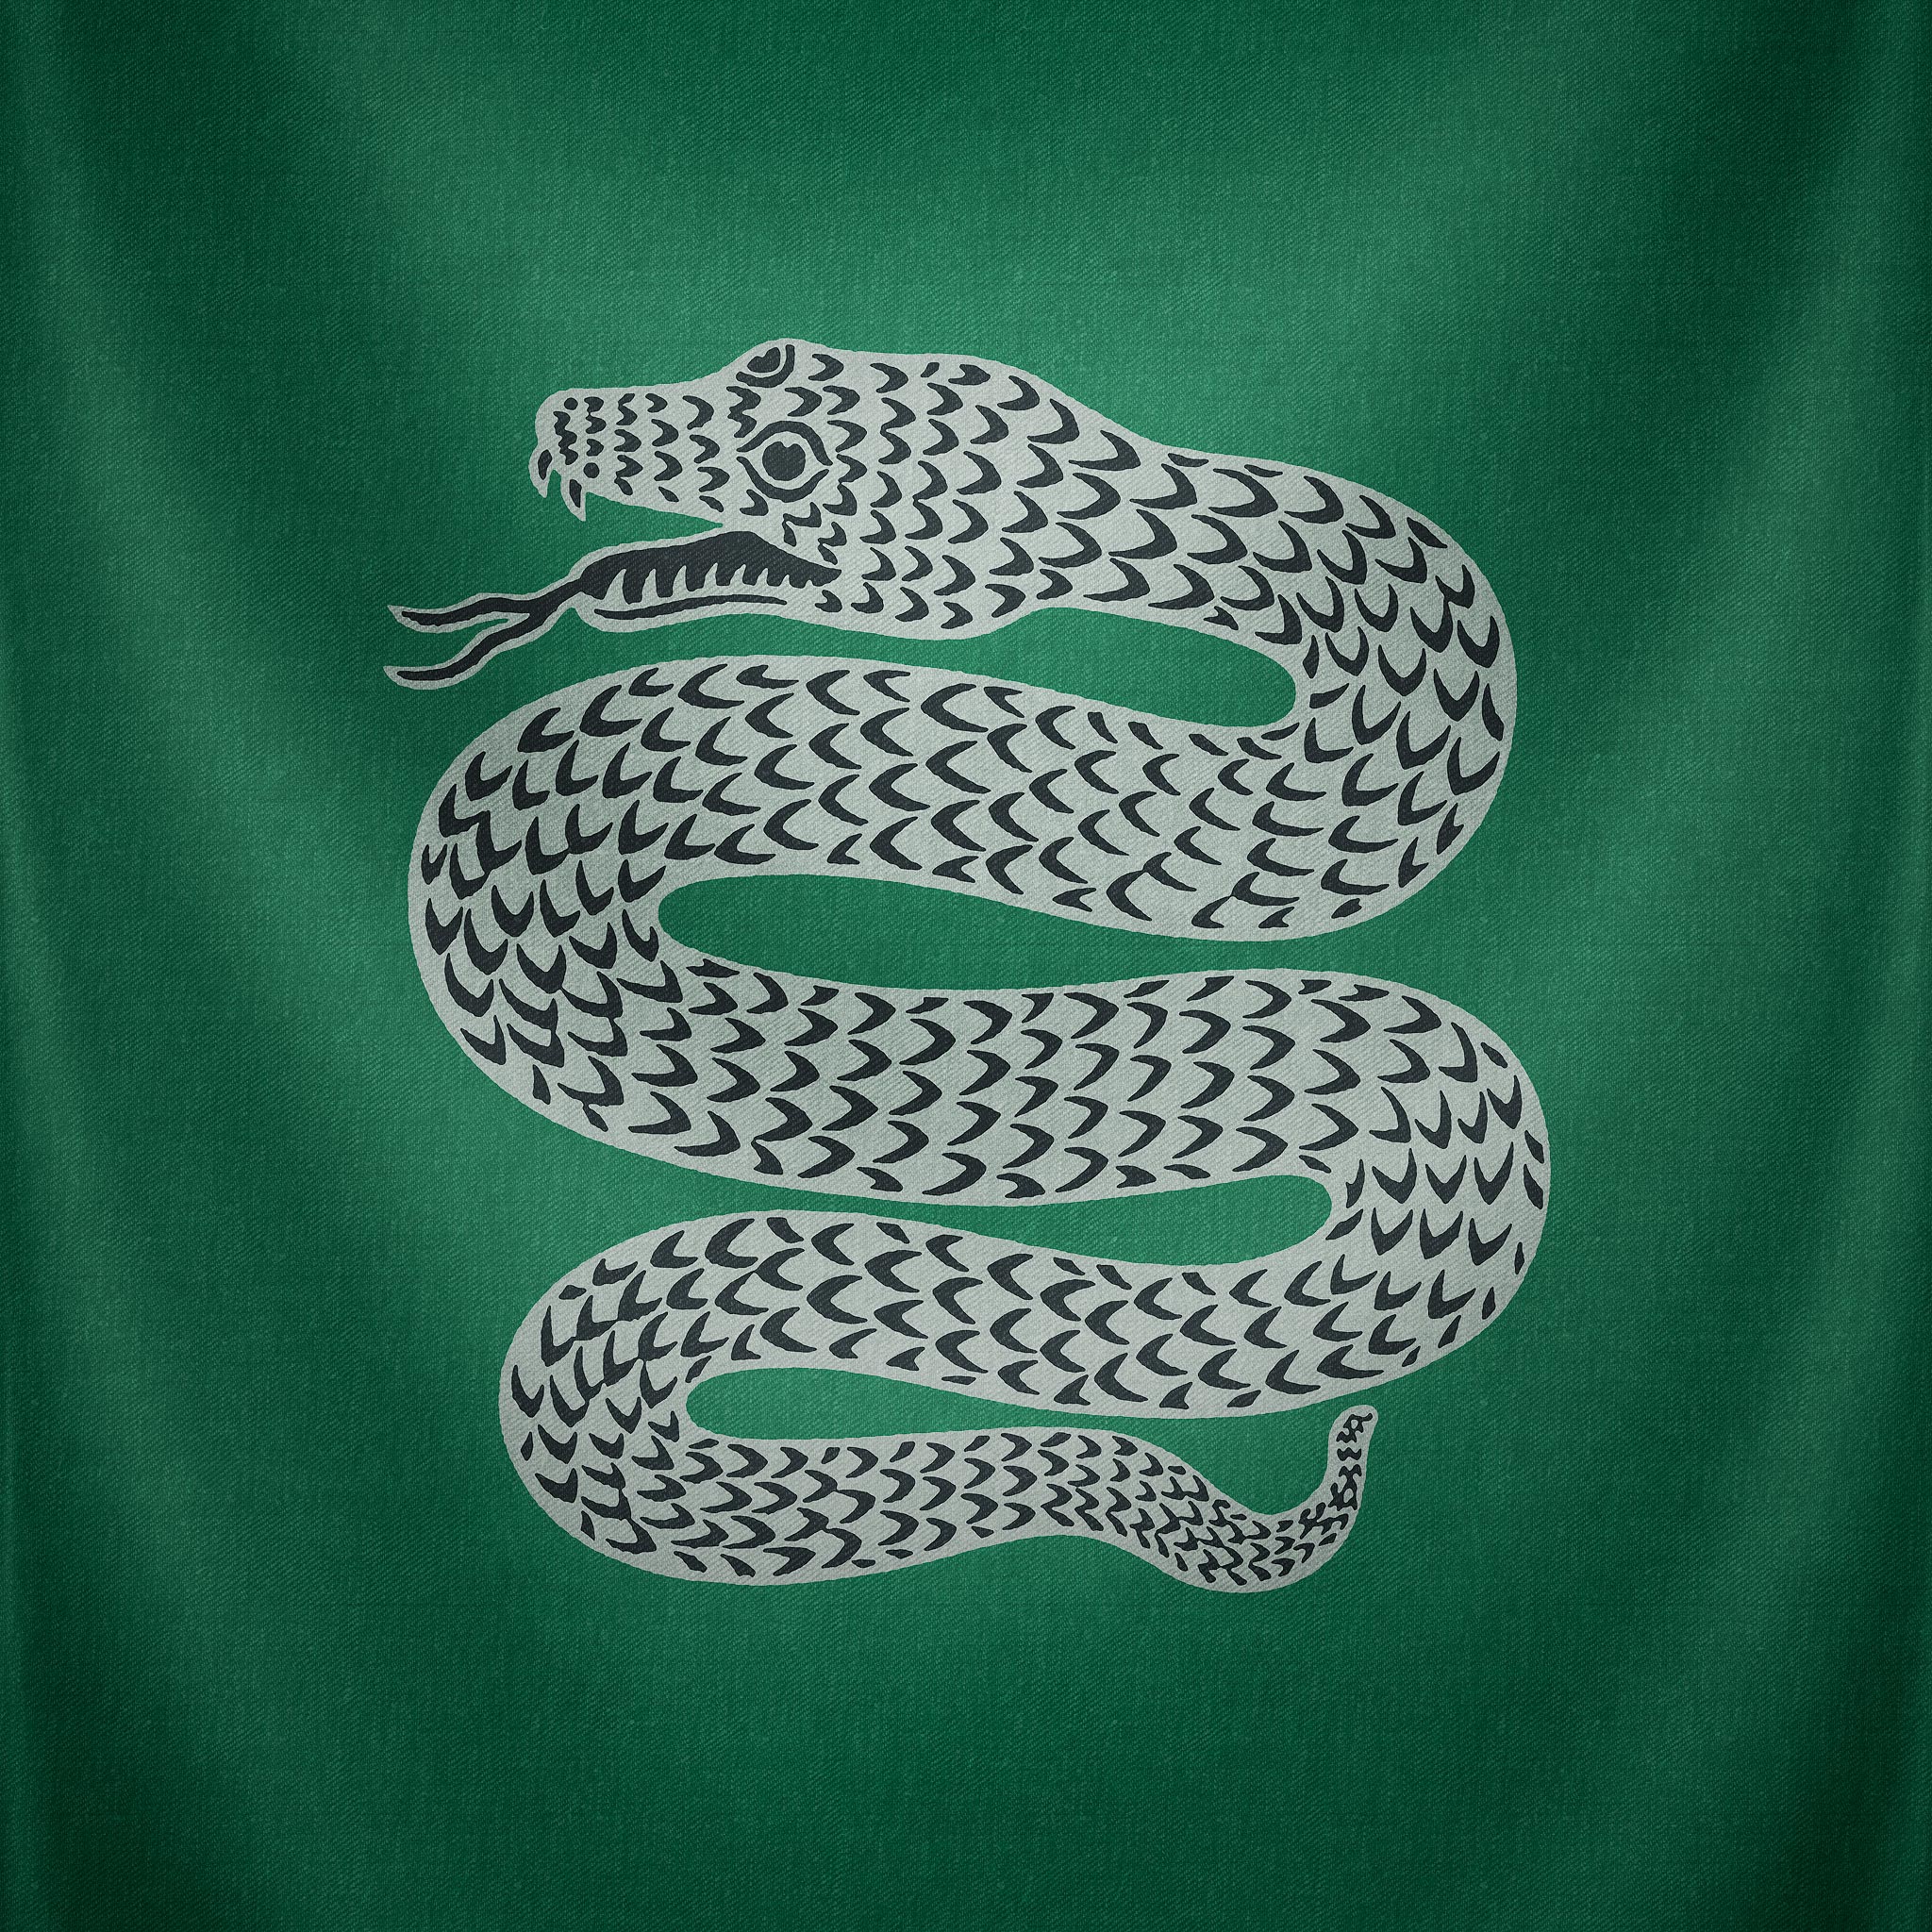 Slytherin Iphone Wallpaper Slytherin Iphone Wallpaper 2048x2048